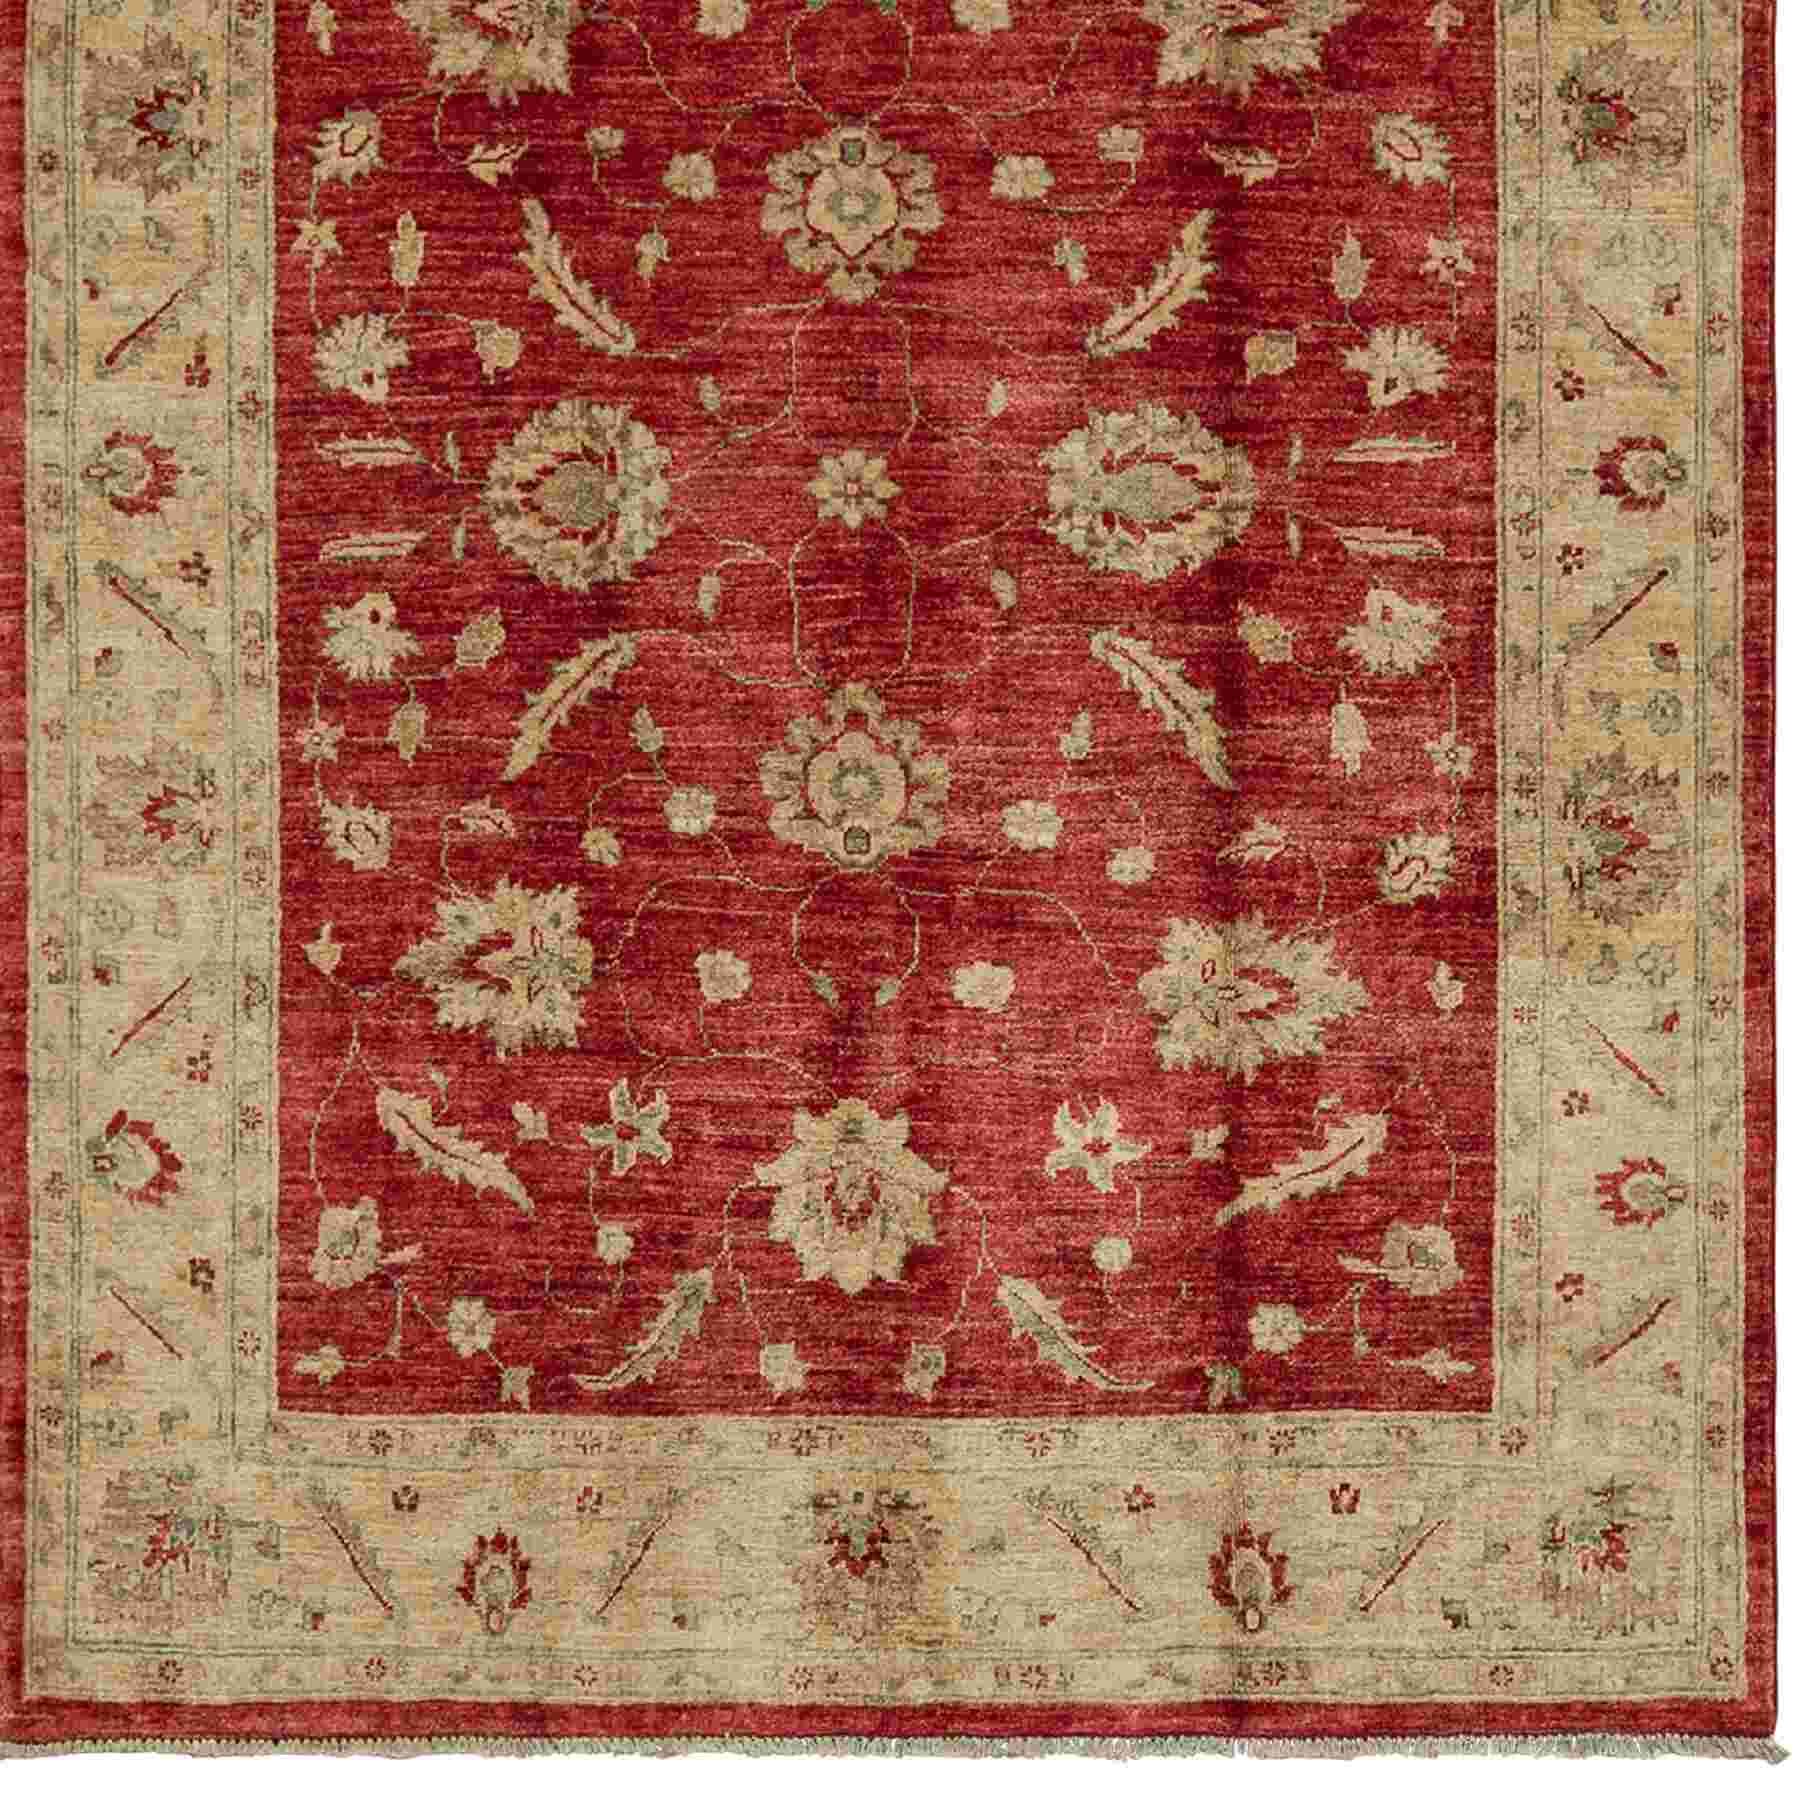 Fine Hand-knotted Wool Rug 152cm x 197cm